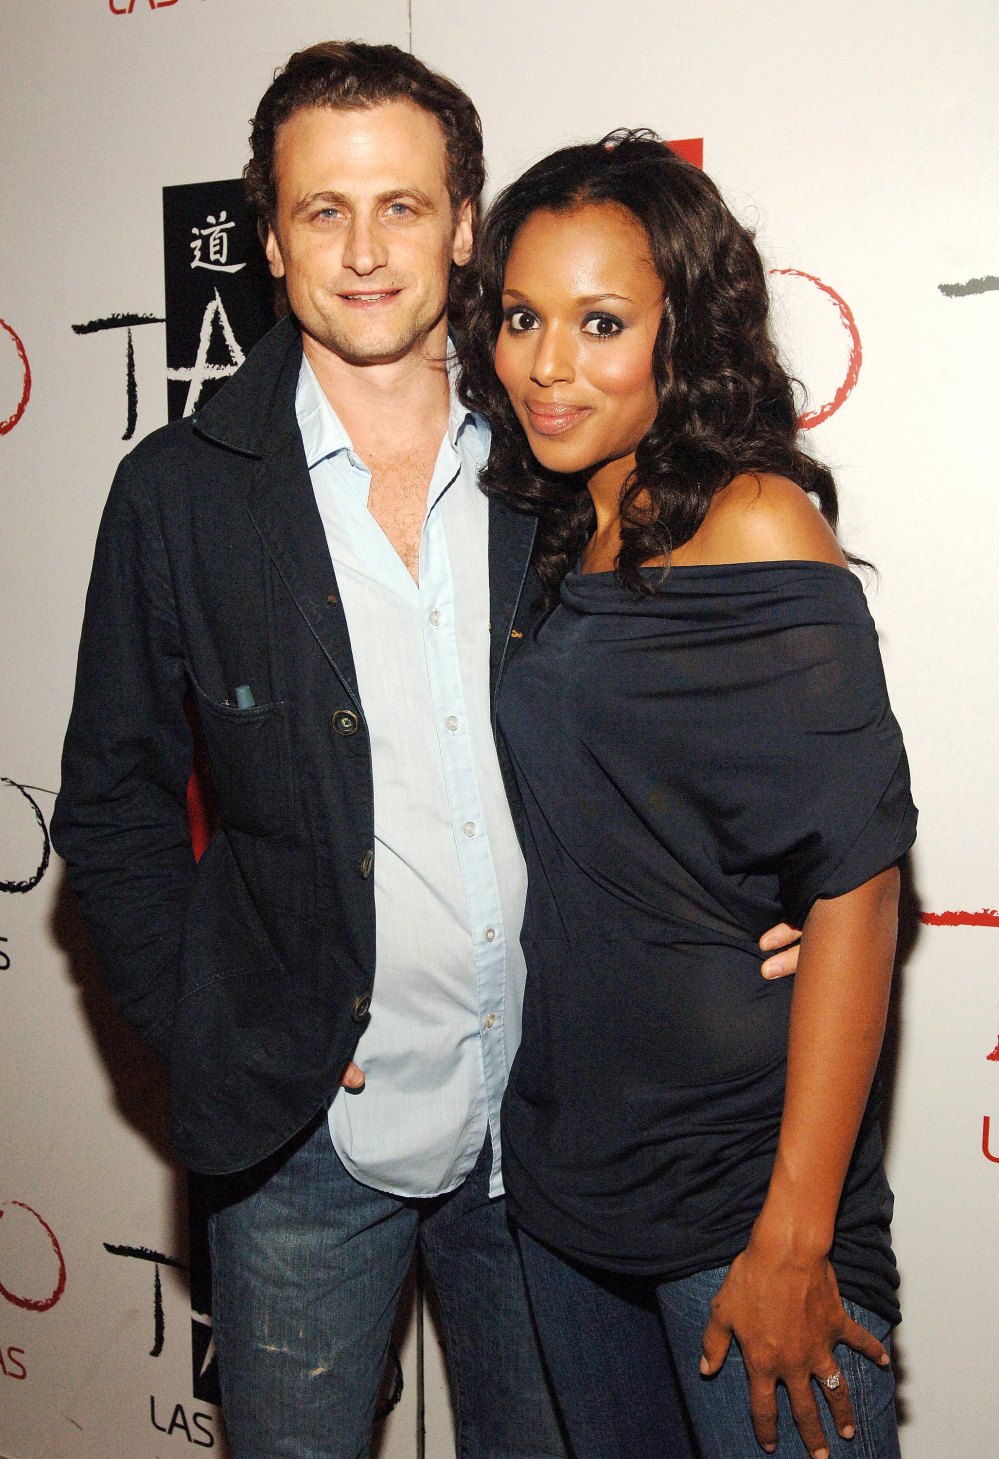 Kerry Washington Reflects on 'Very Public Relationship' With Ex David Moscow